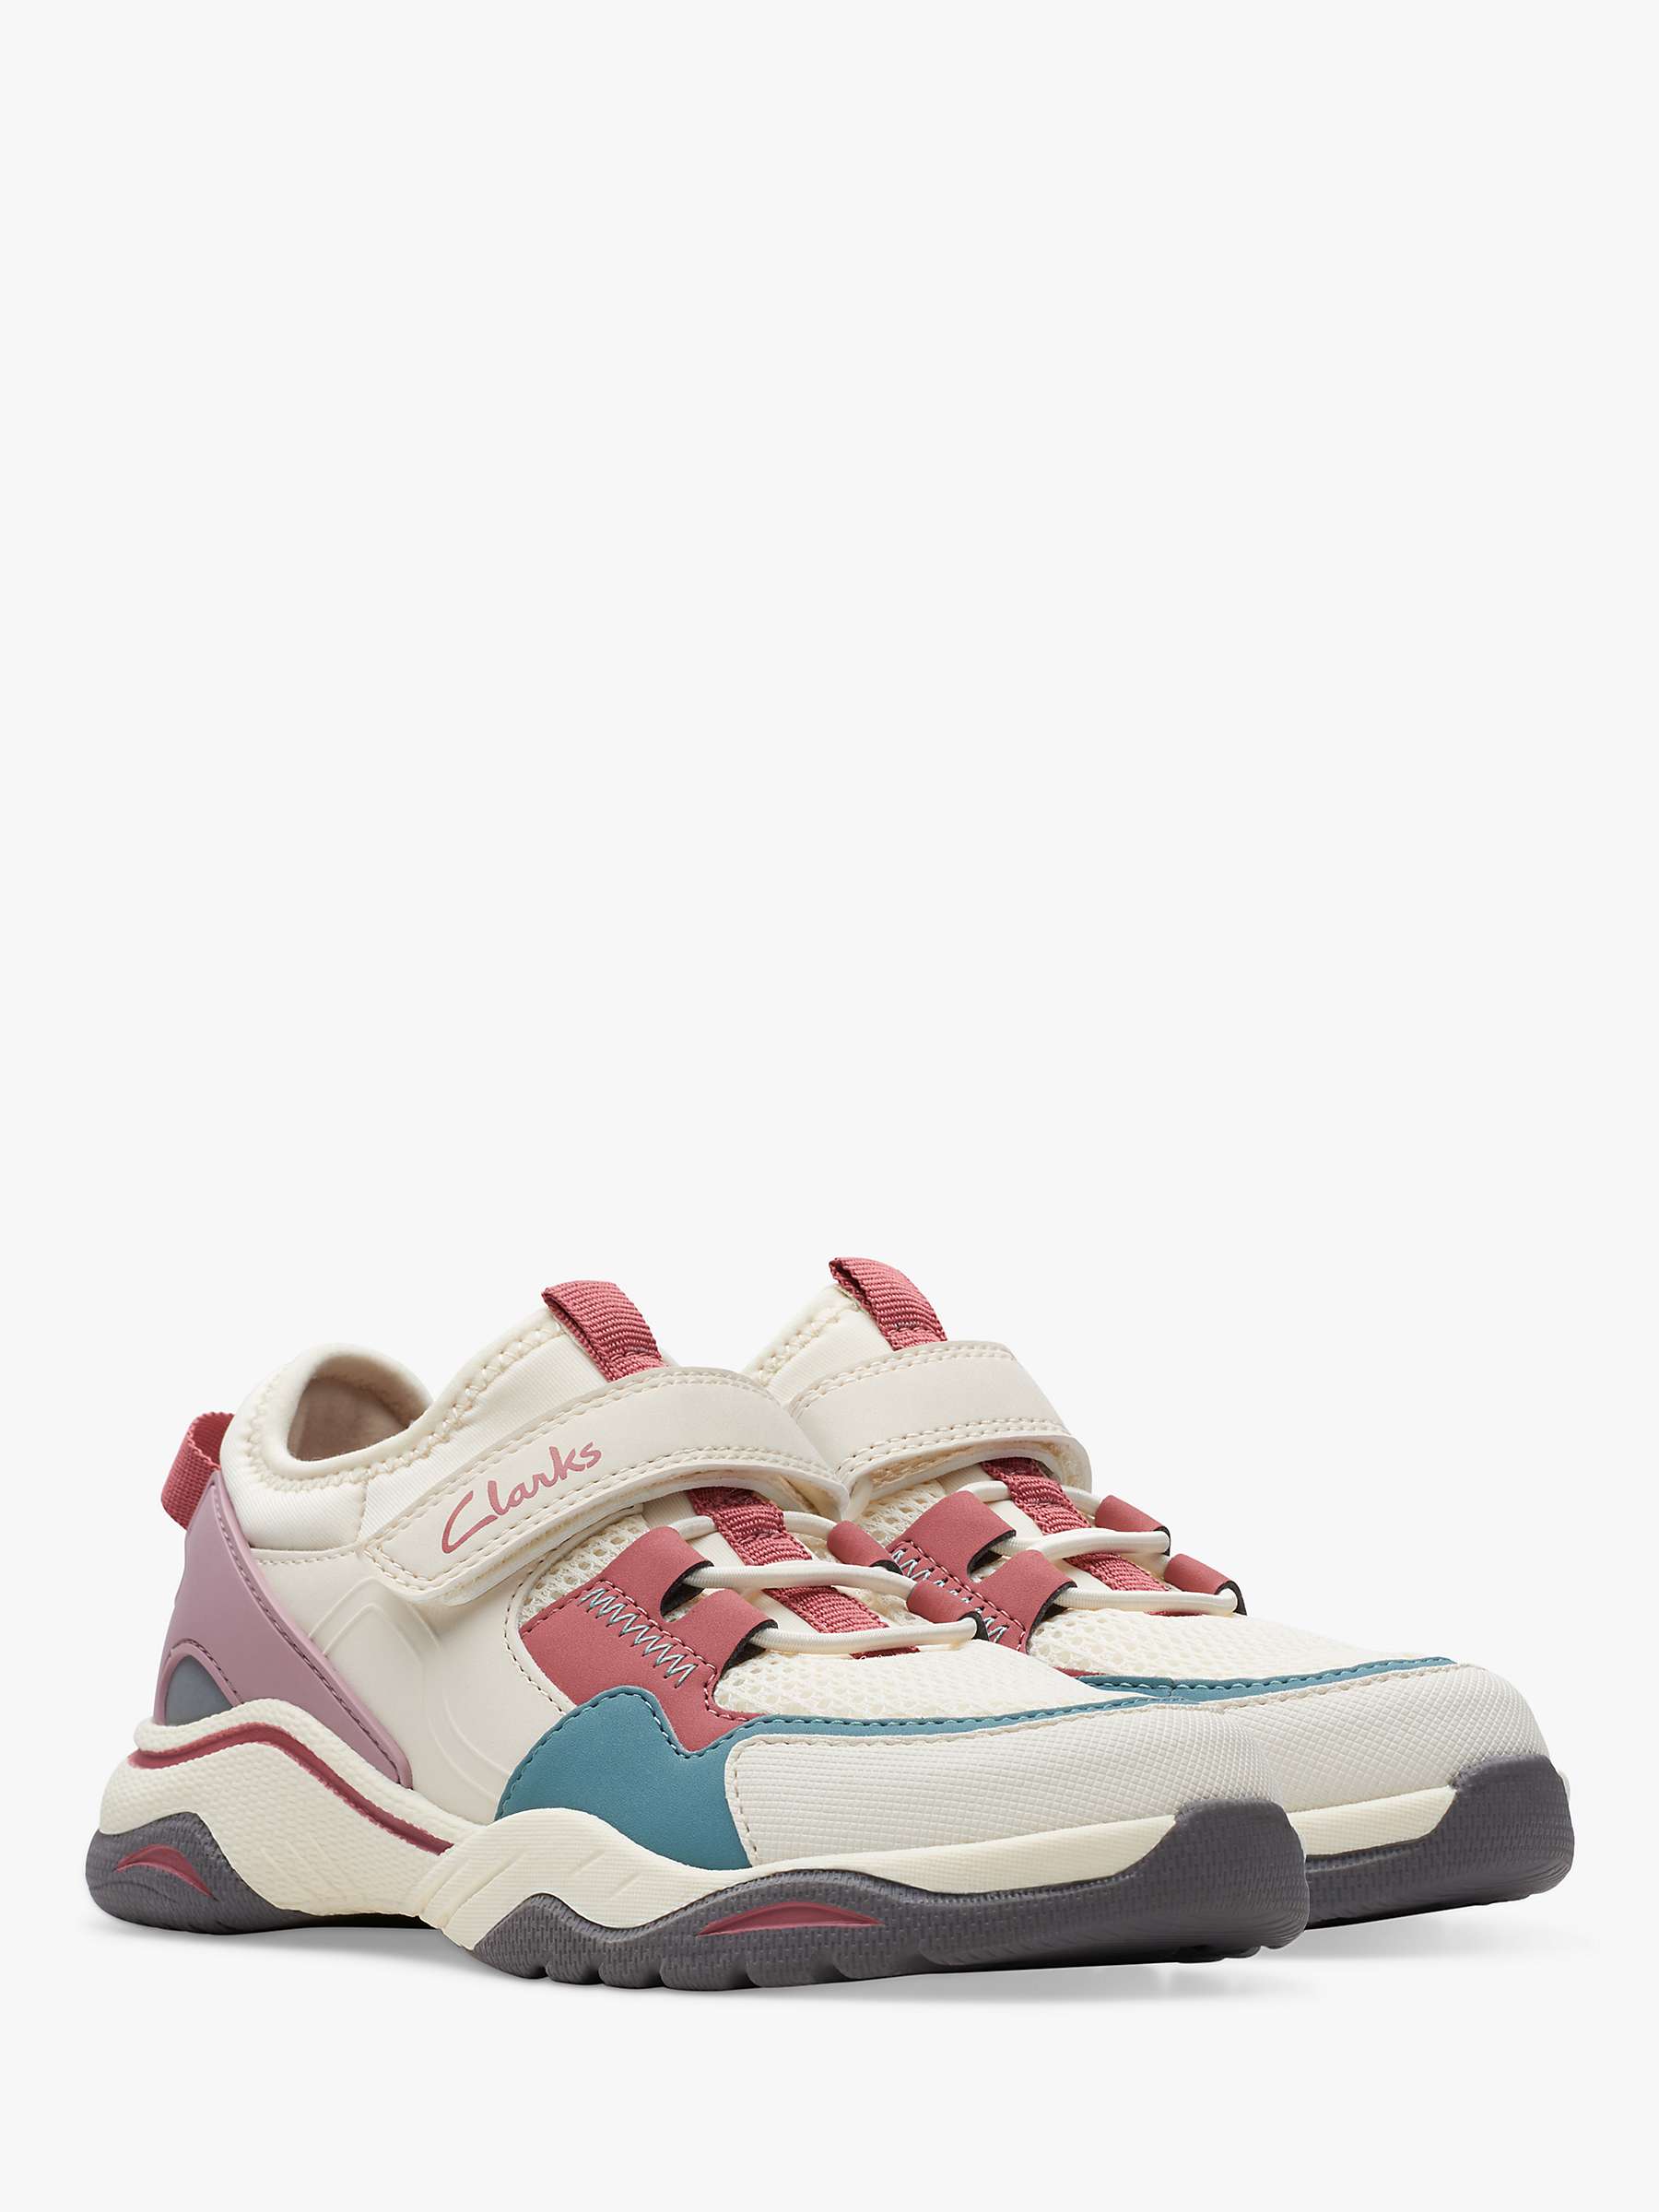 Buy Clarks Kids' Feather Hop Trainers, Off White Online at johnlewis.com